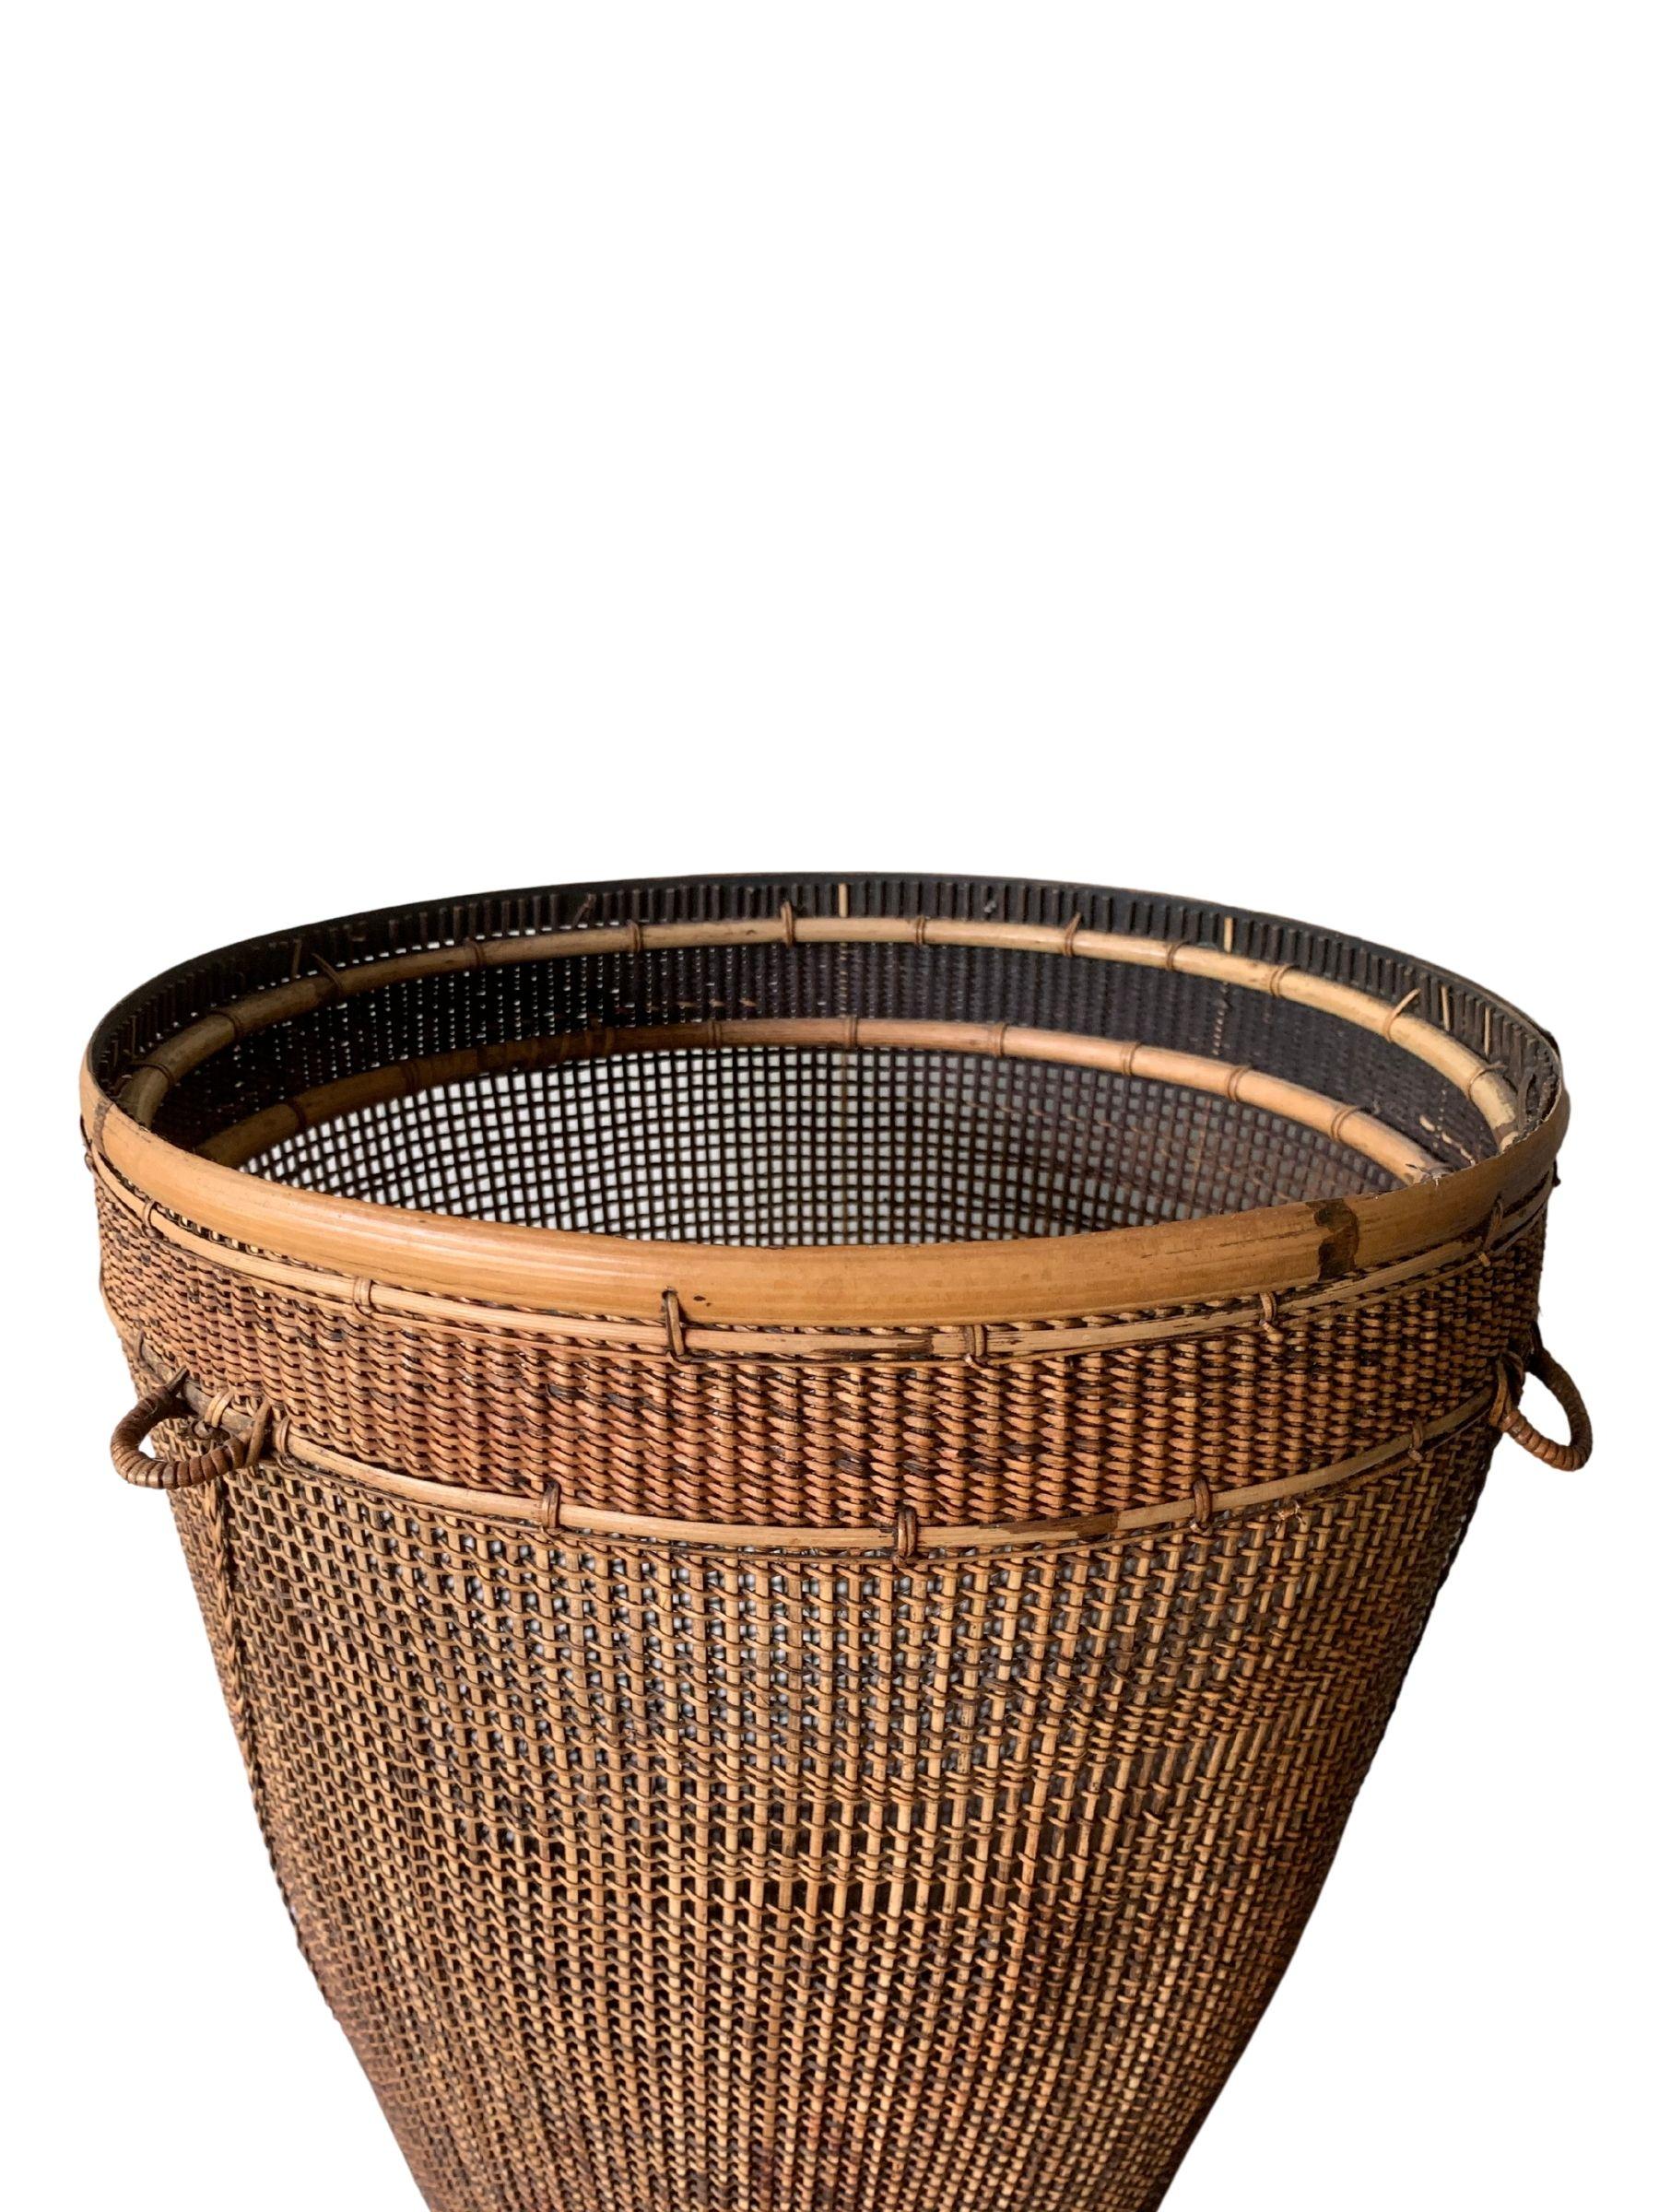 Bamboo & Rattan Basket from Dayak Tribe, Hand-Crafted Borneo, Indonesia, c. 1950 For Sale 1